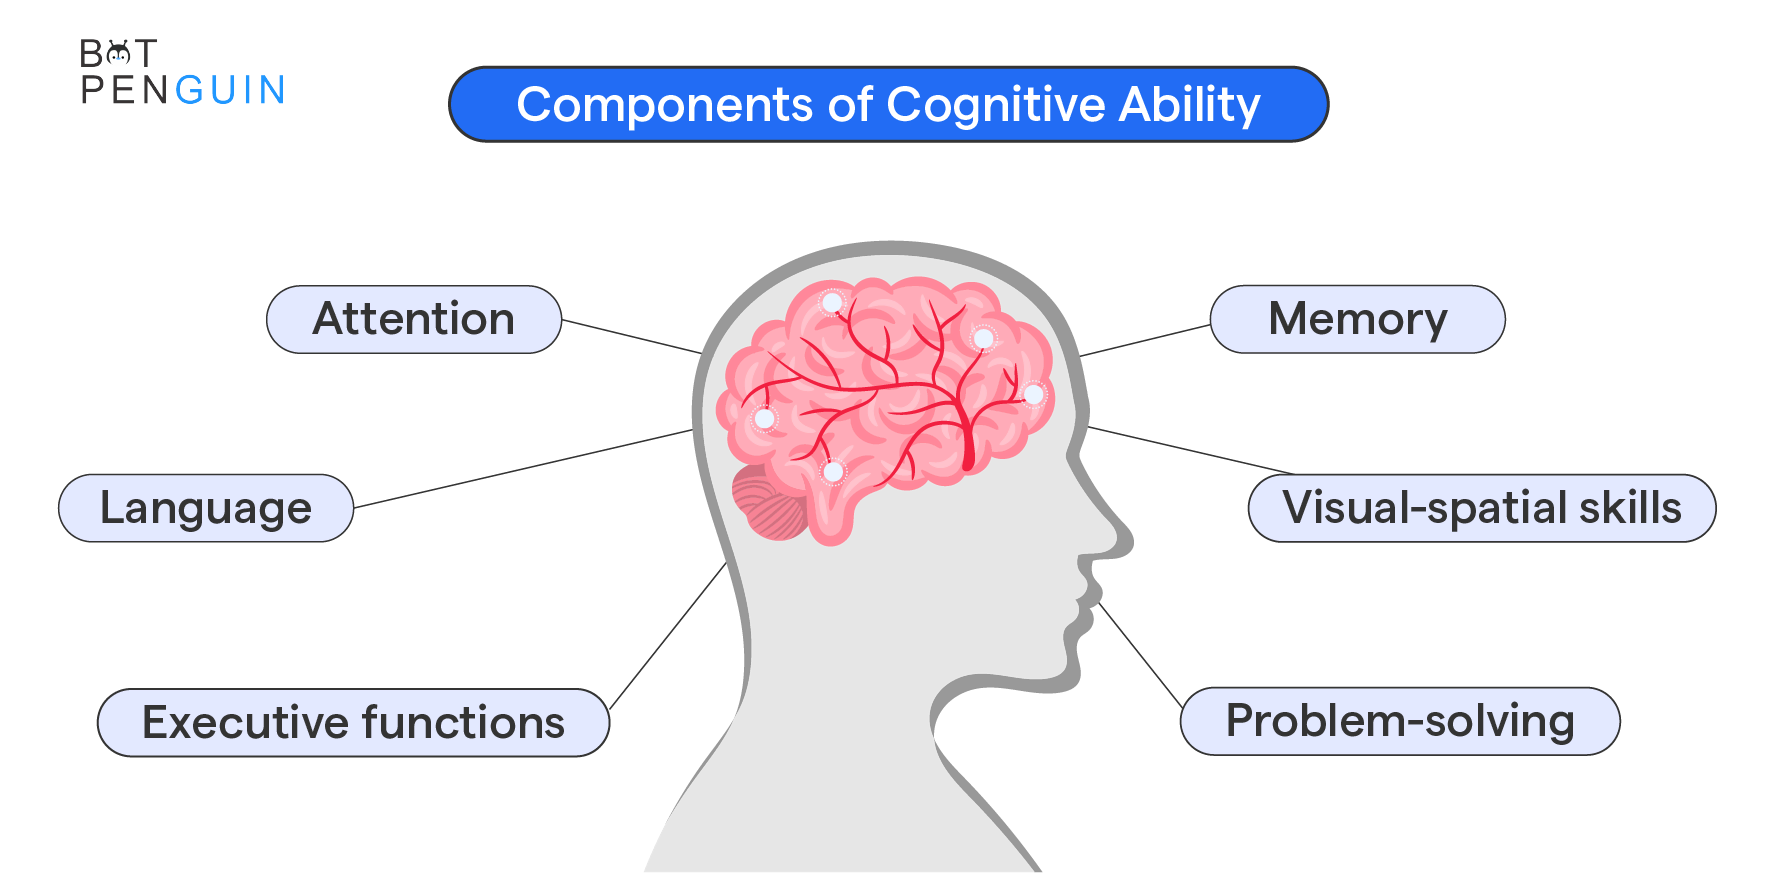 Components of Cognitive Ability